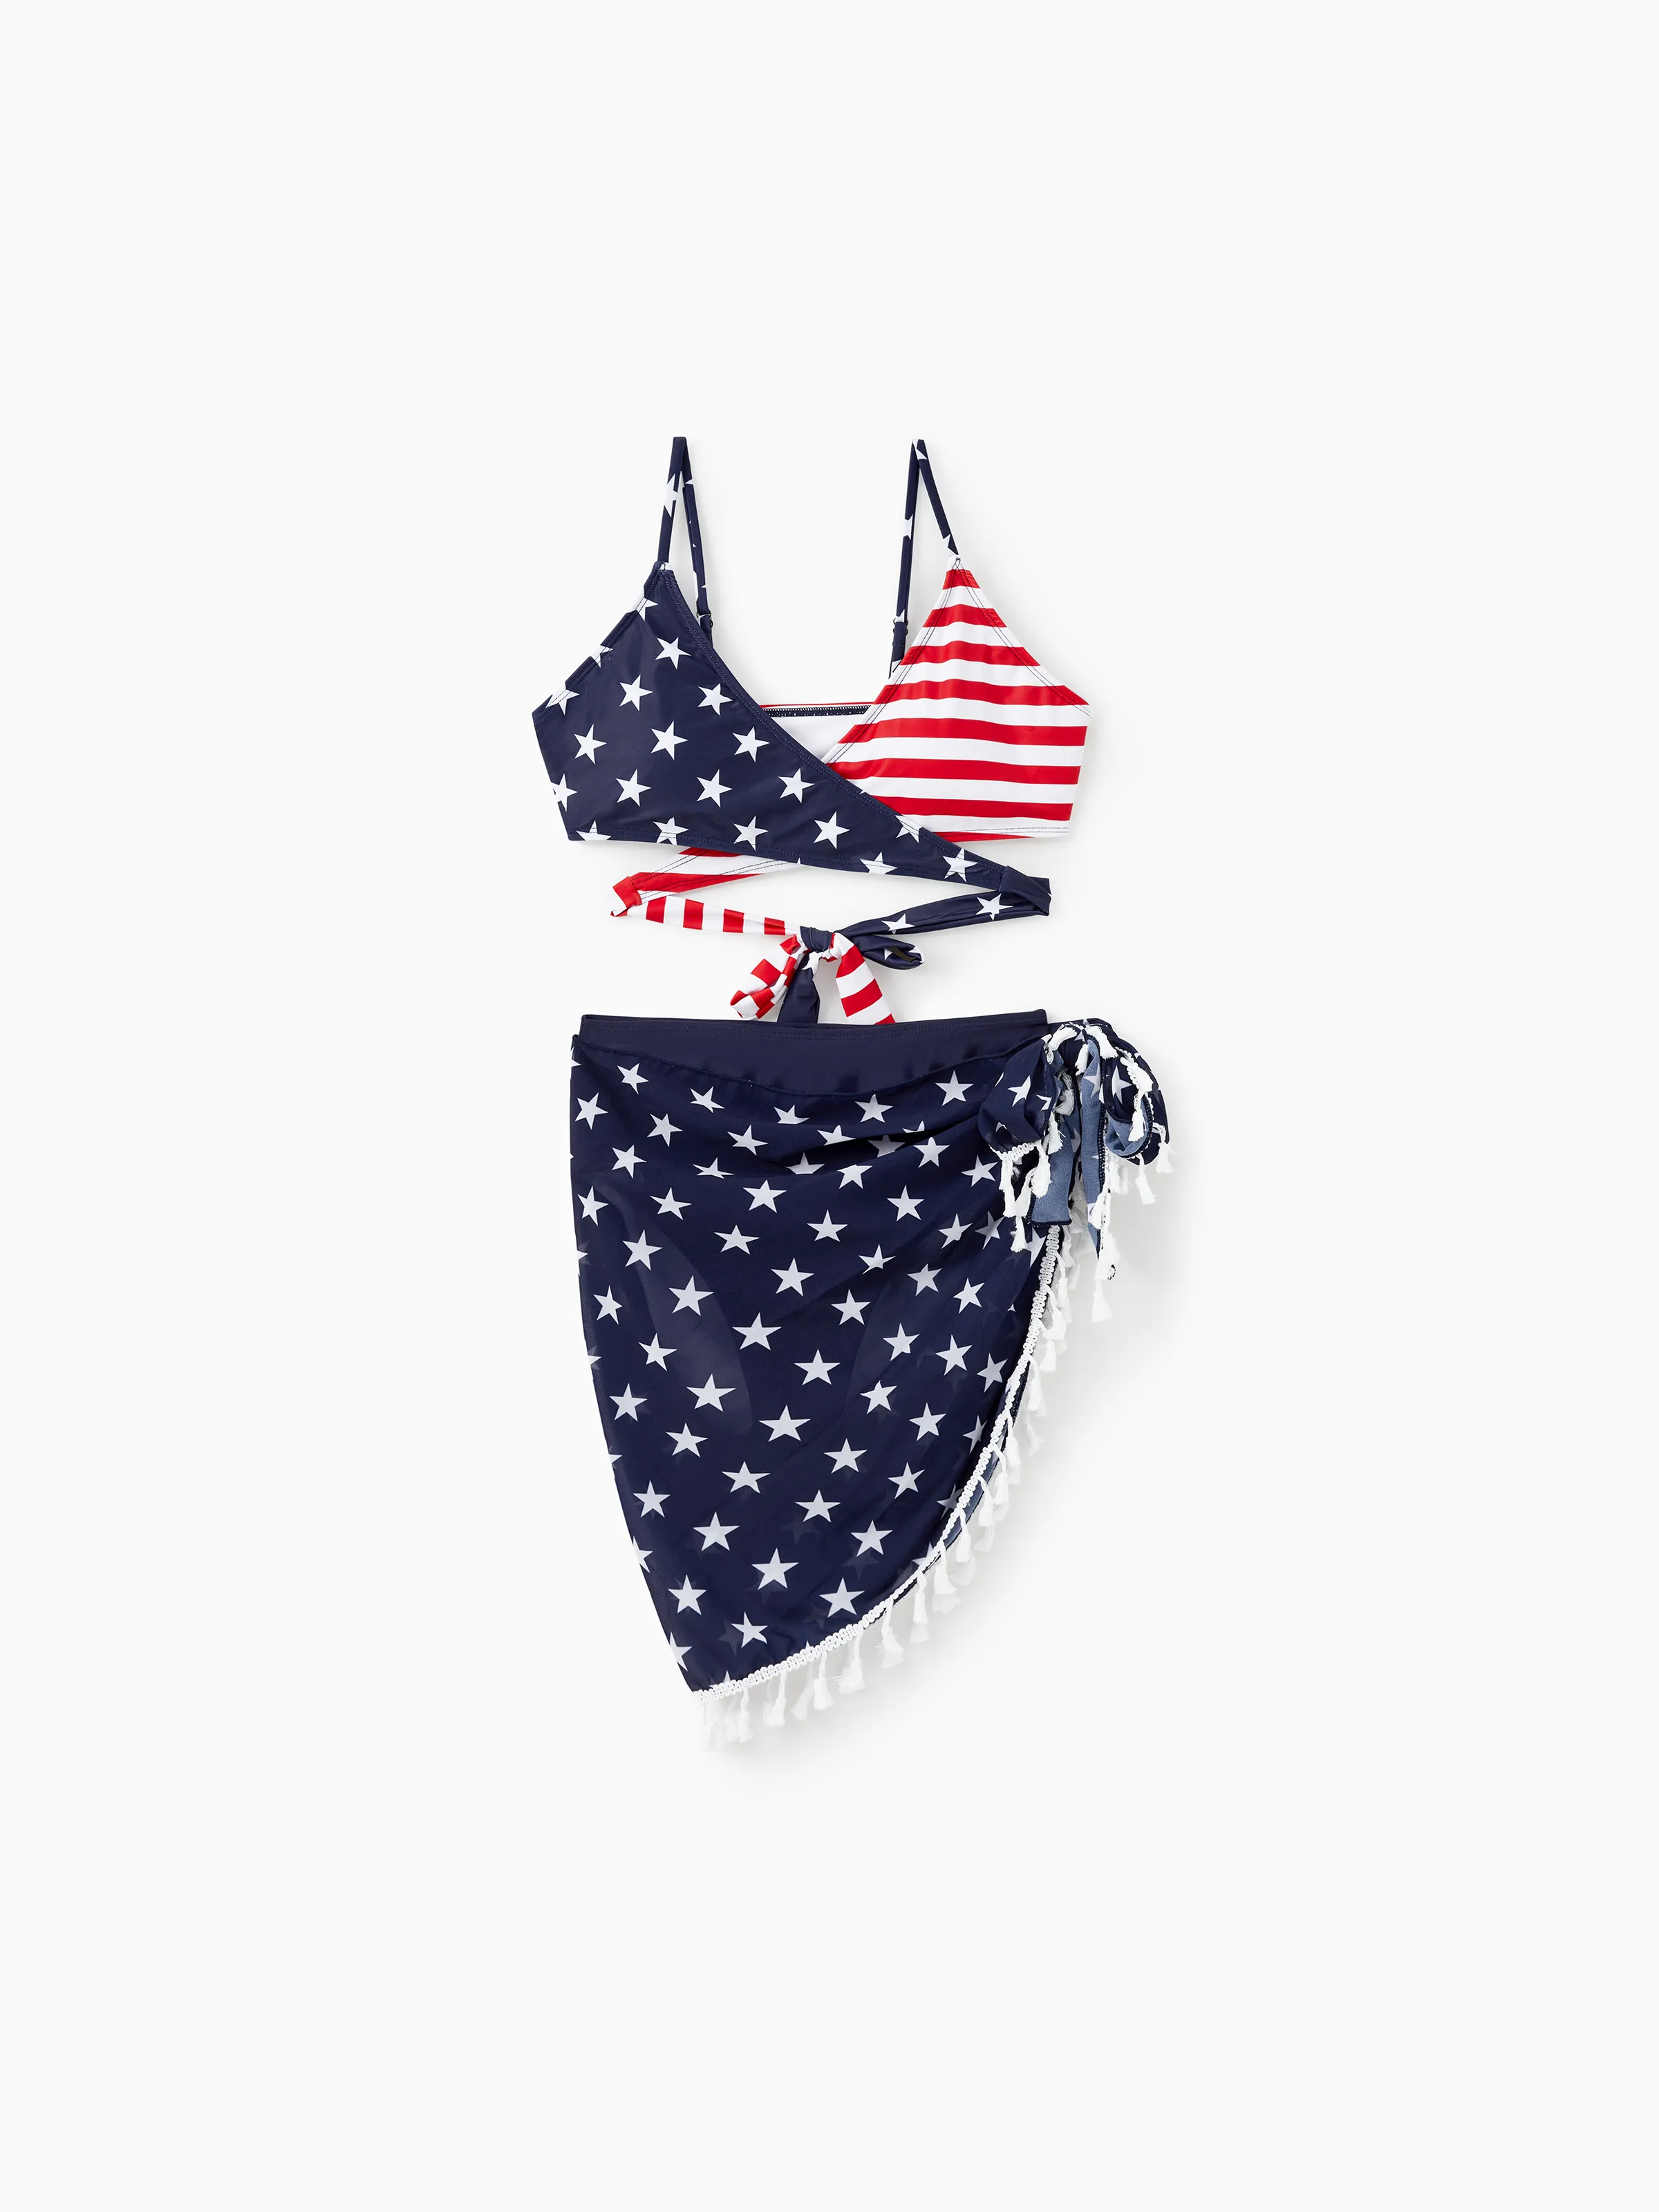 

Independence Day Family Matching Swimsuits American Flag Drawstring Swim Trunks or Bikini with Optional Sarong Cover Up Skirt